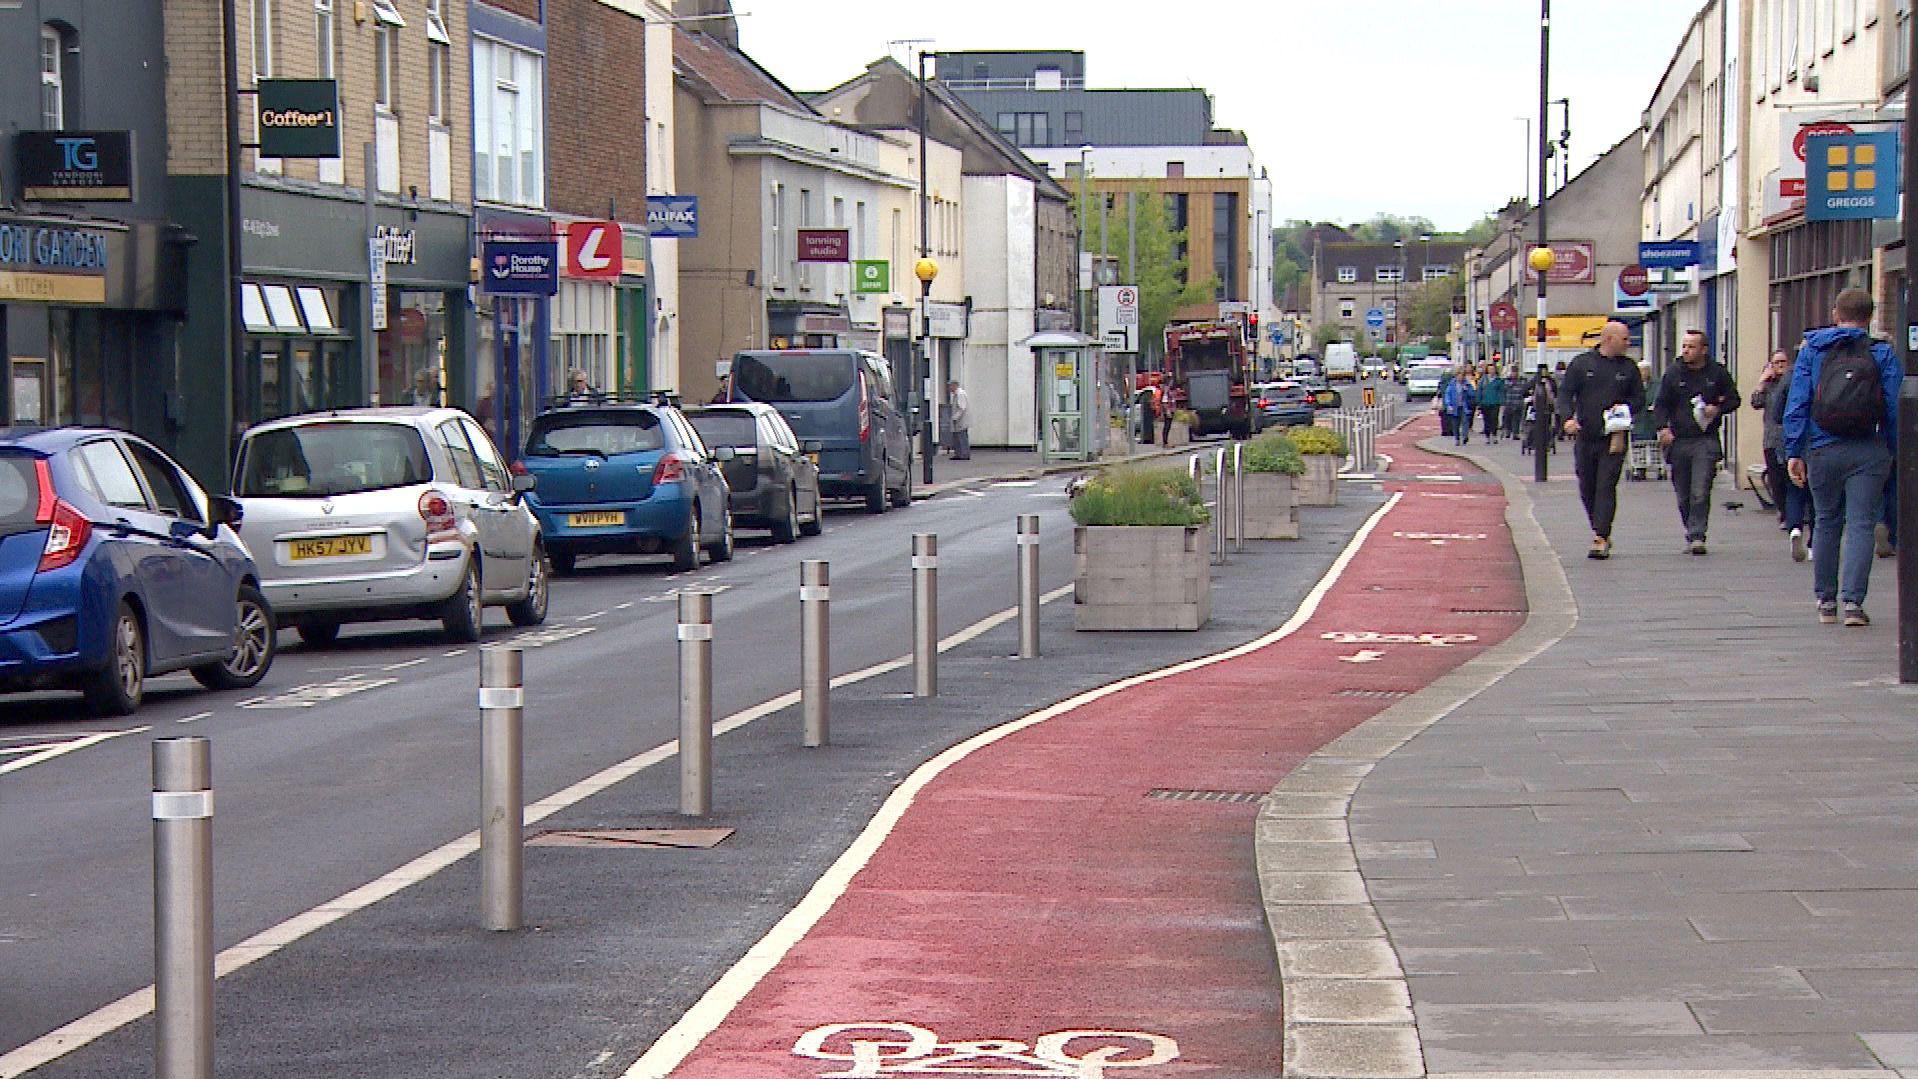 'optical illusion' cycle lane to get overnight fix